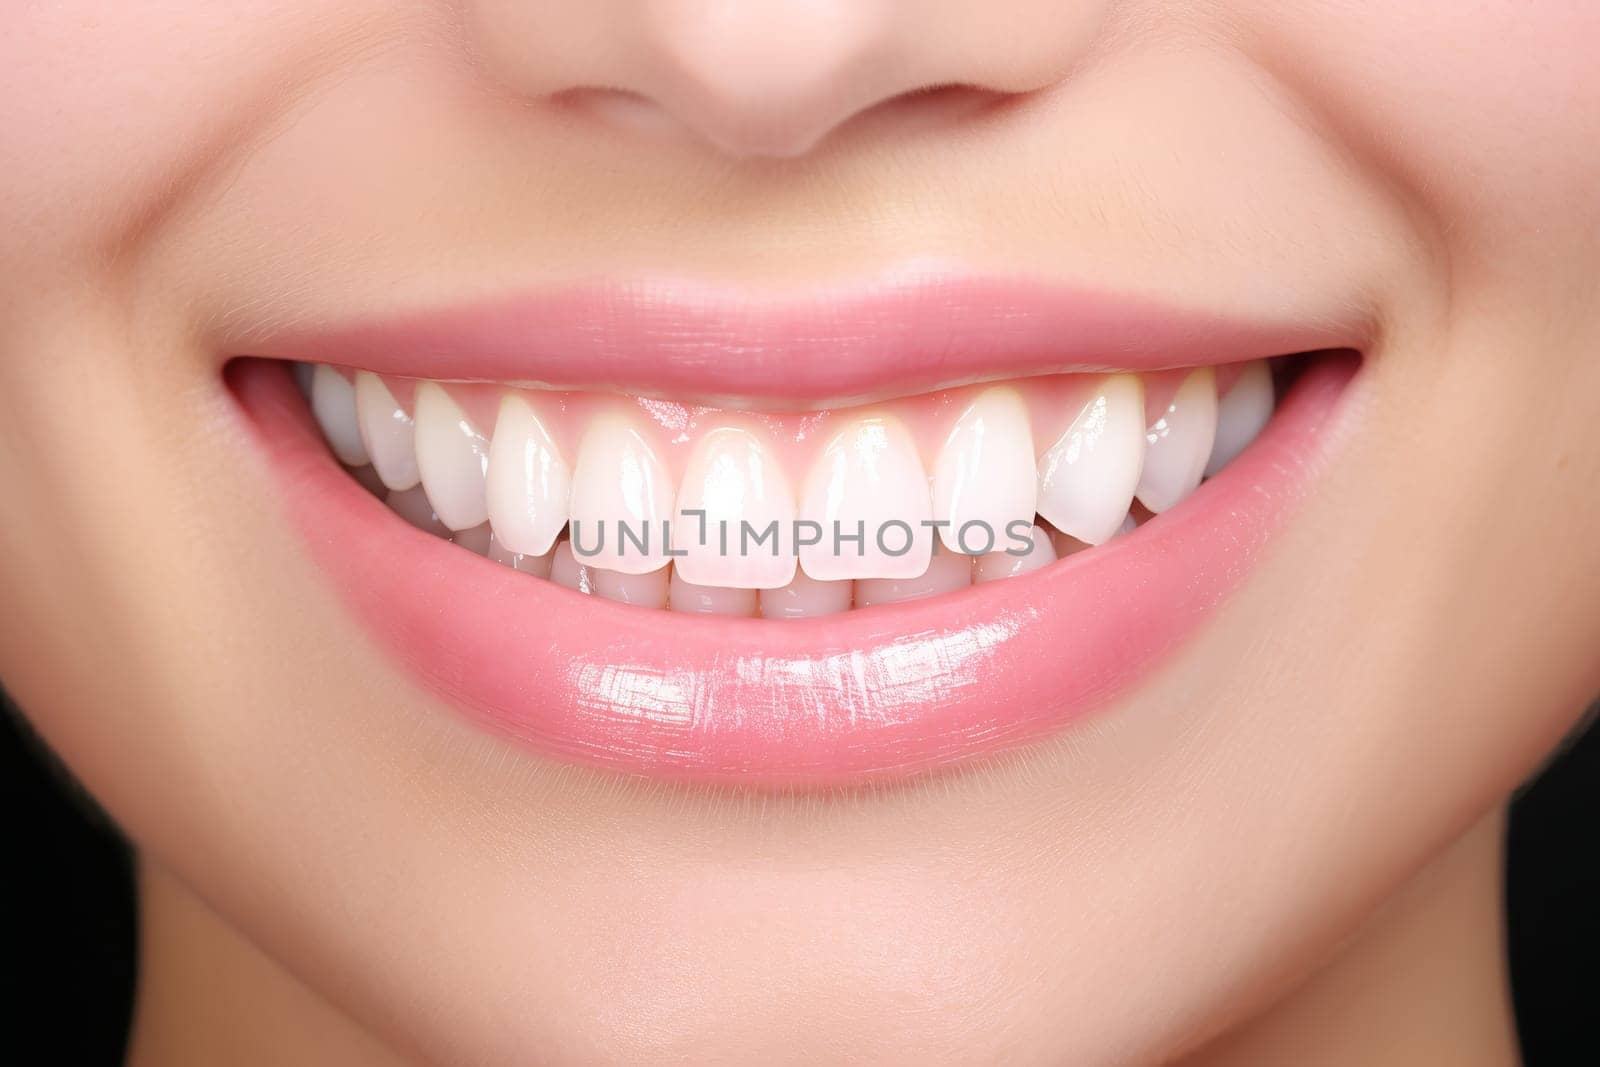 A close-up portrait that captures the radiant smile of an individual with professionally whitened teeth, symbolizing dental health and confidence